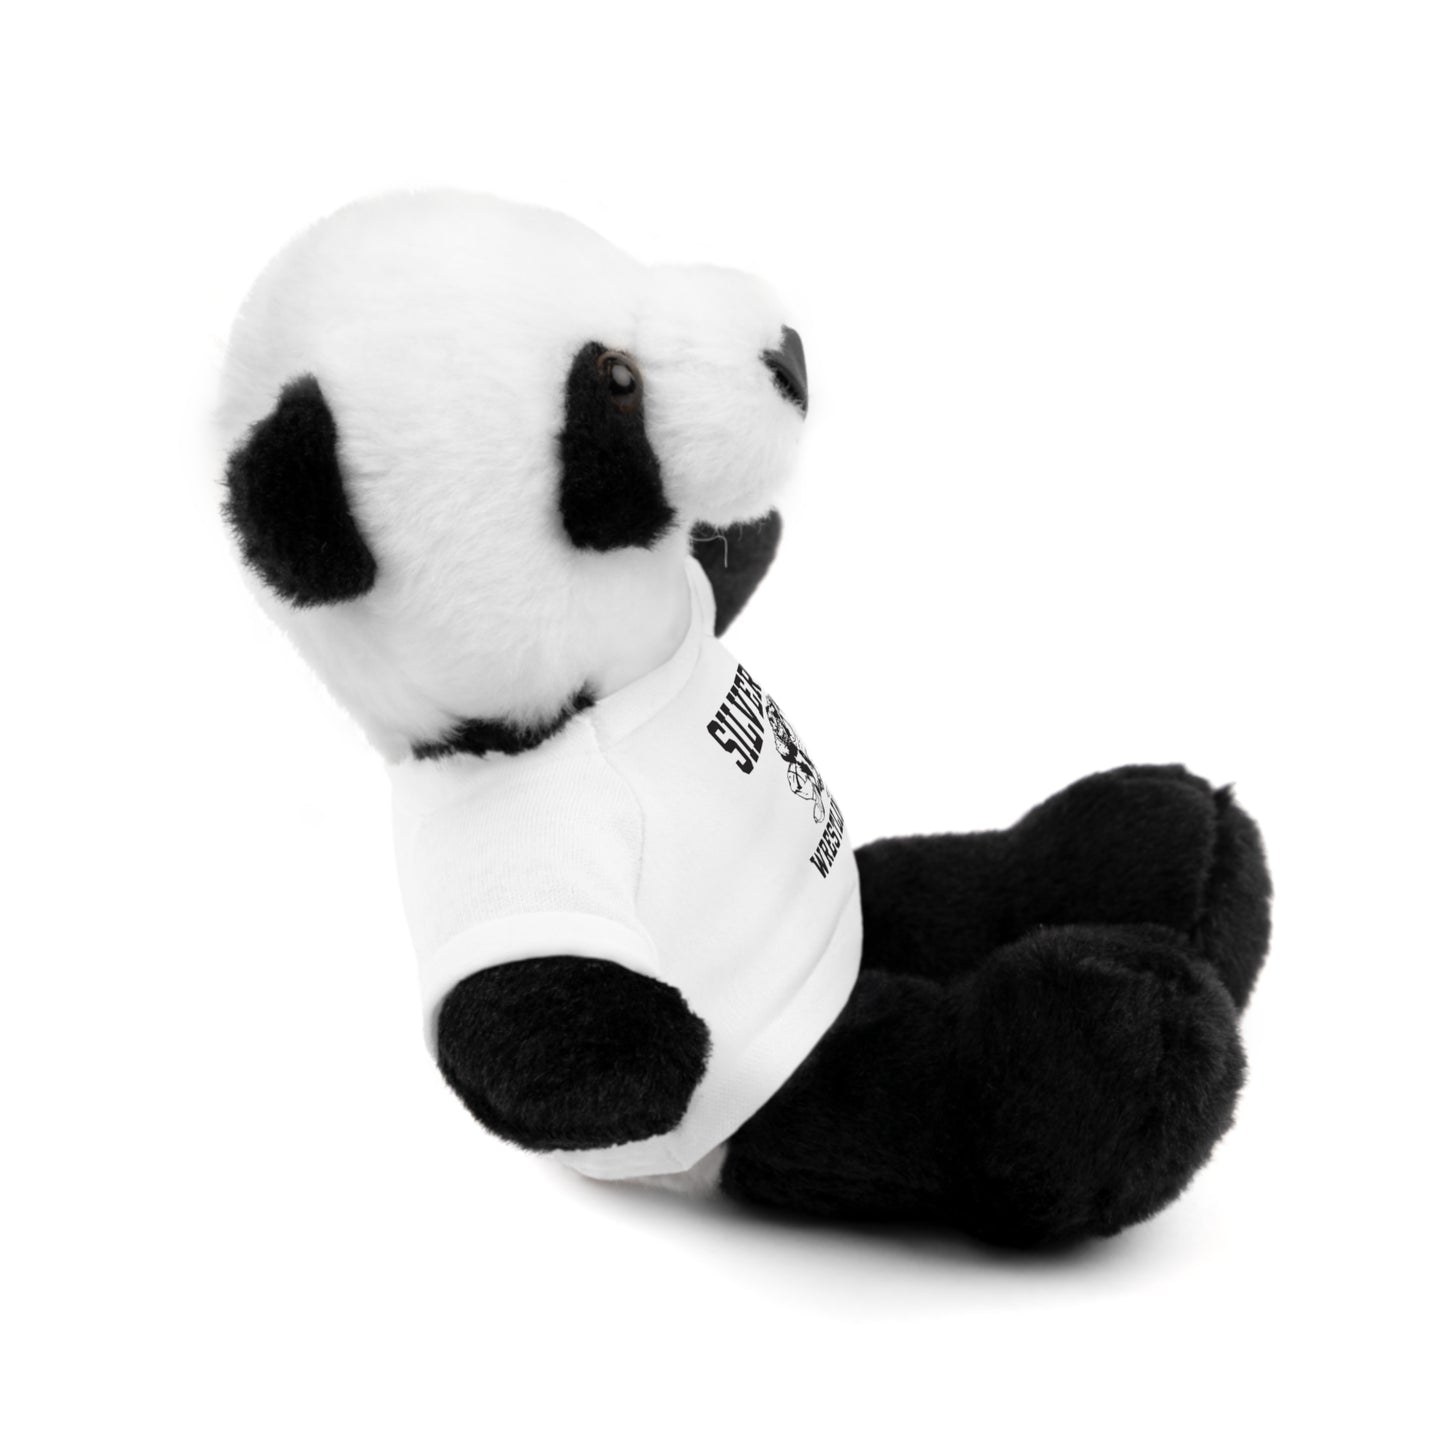 Silverback Wrestling Stuffed Animals with Tee (multiple animals and colors to choose from)